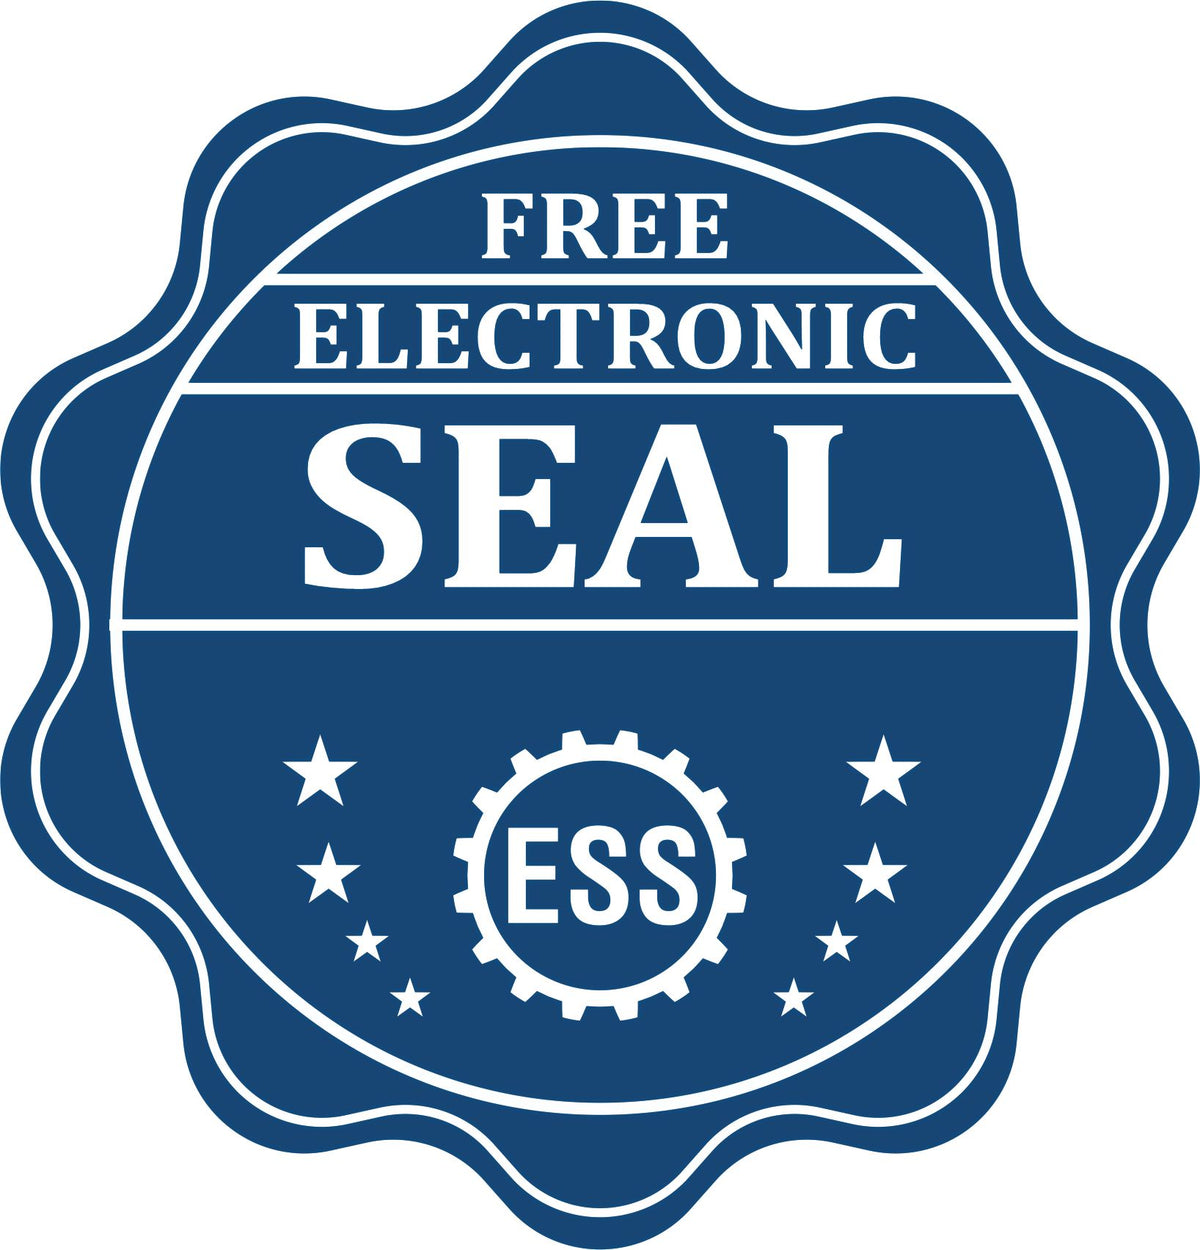 A badge showing a free electronic seal for the Handheld Kentucky Professional Geologist Embosser with stars and the ESS gear on the emblem.